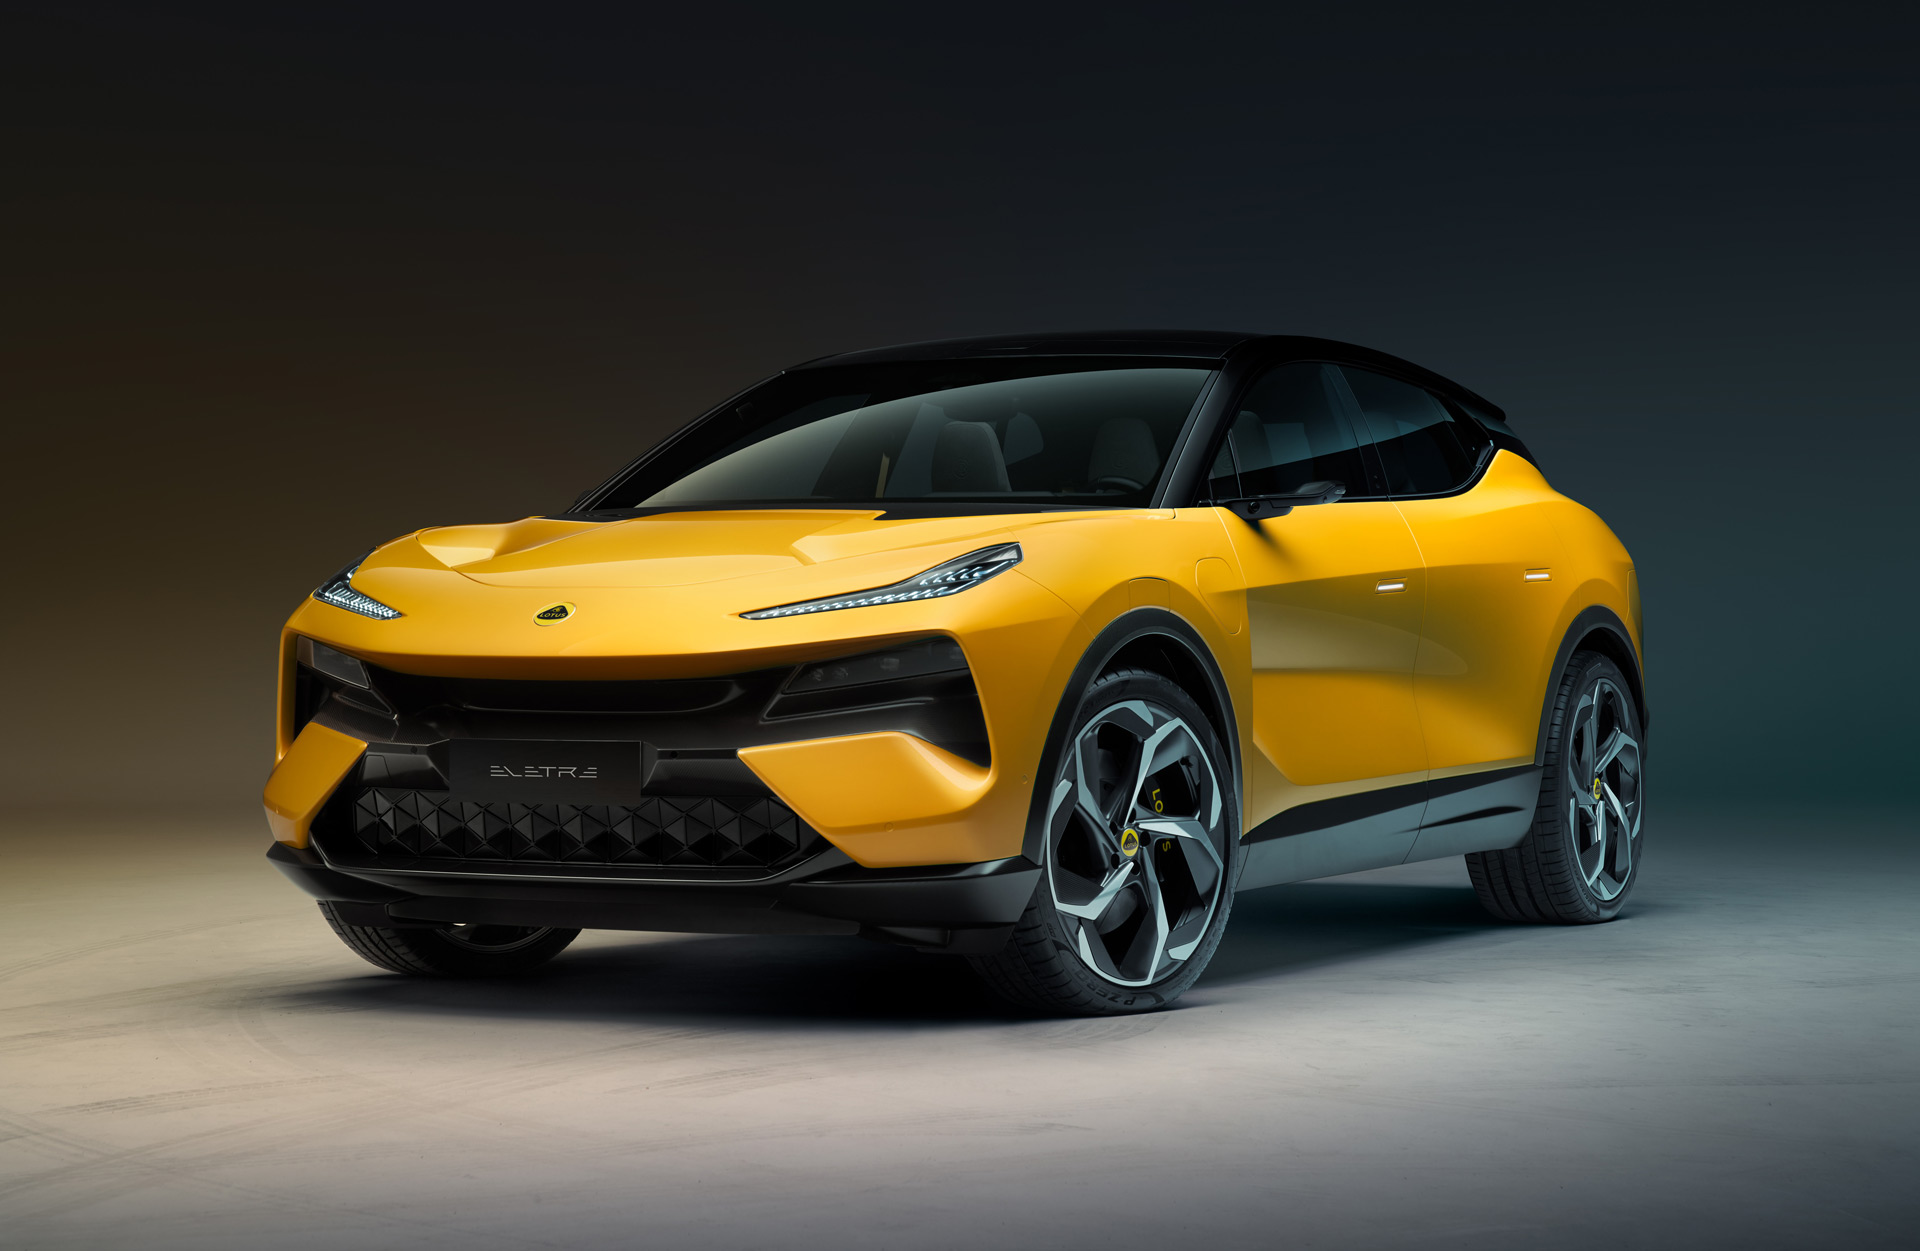 Lotus Eletre electric SUV promises 0-60 mph in under 3s, over 300 miles of range Auto Recent